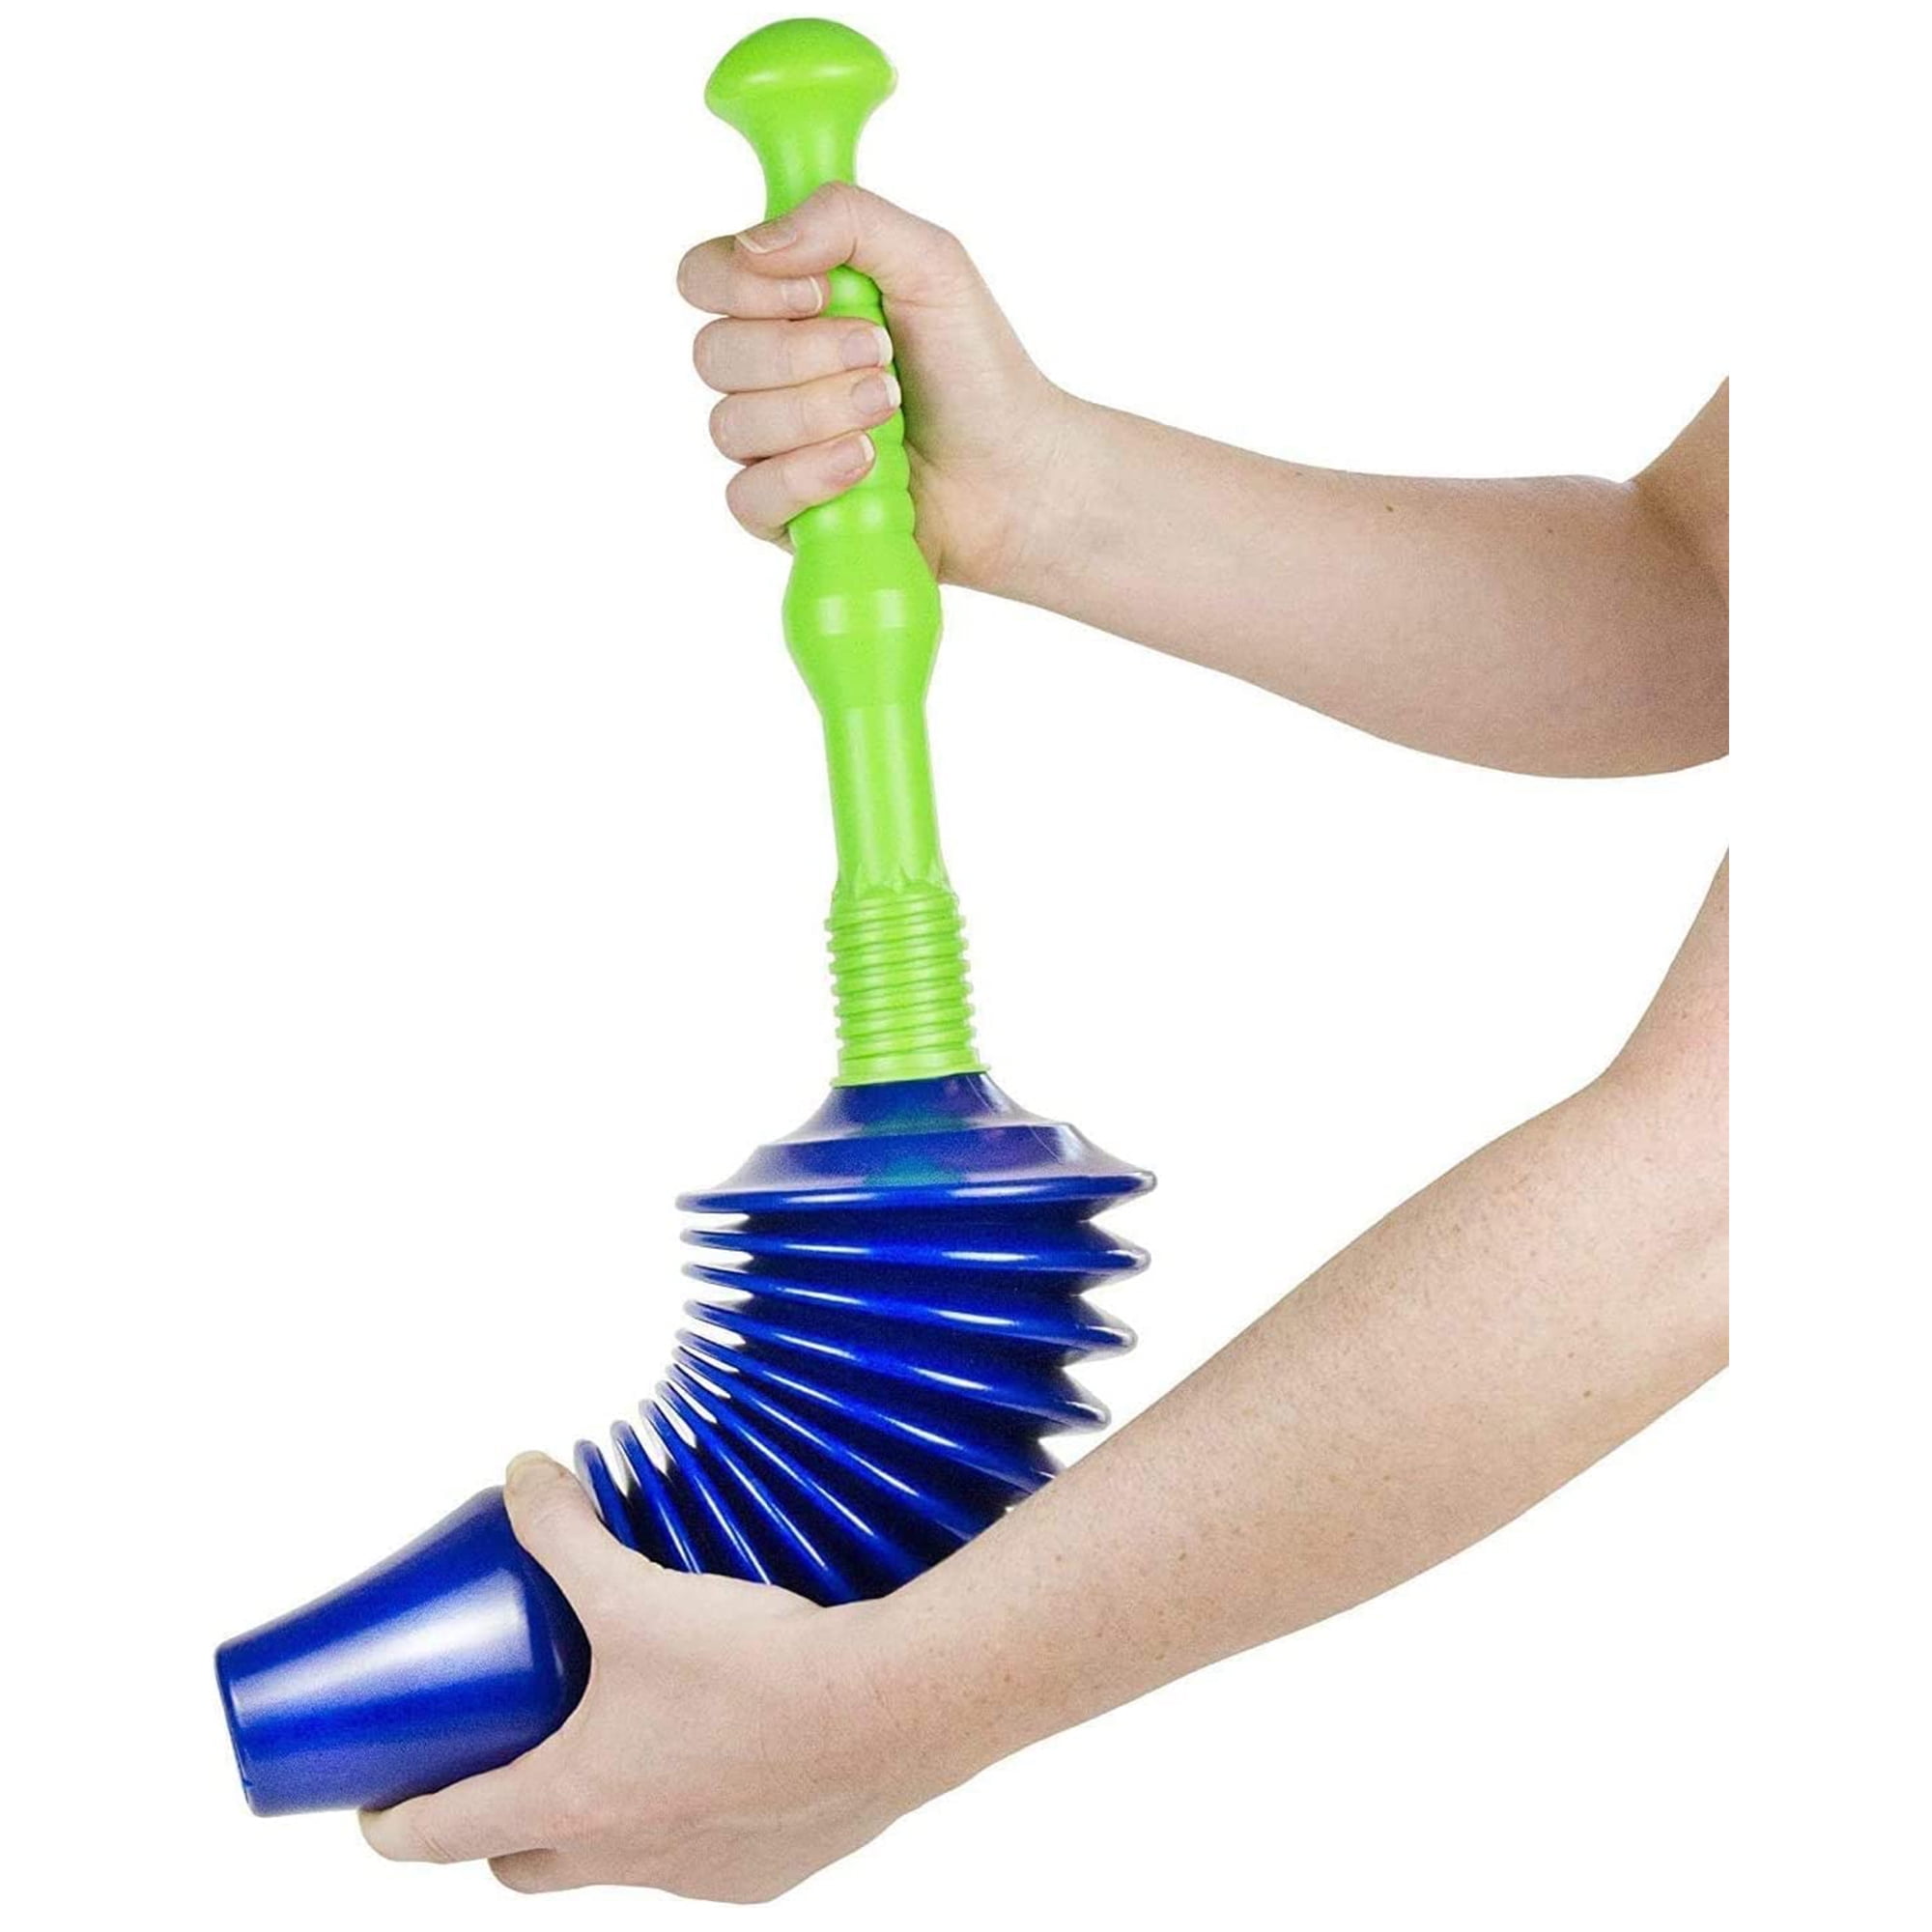 Luigi's Heavy Duty Plunger & Sink Declogger Clogged Drain Cleaning Tools,  Small Blue 